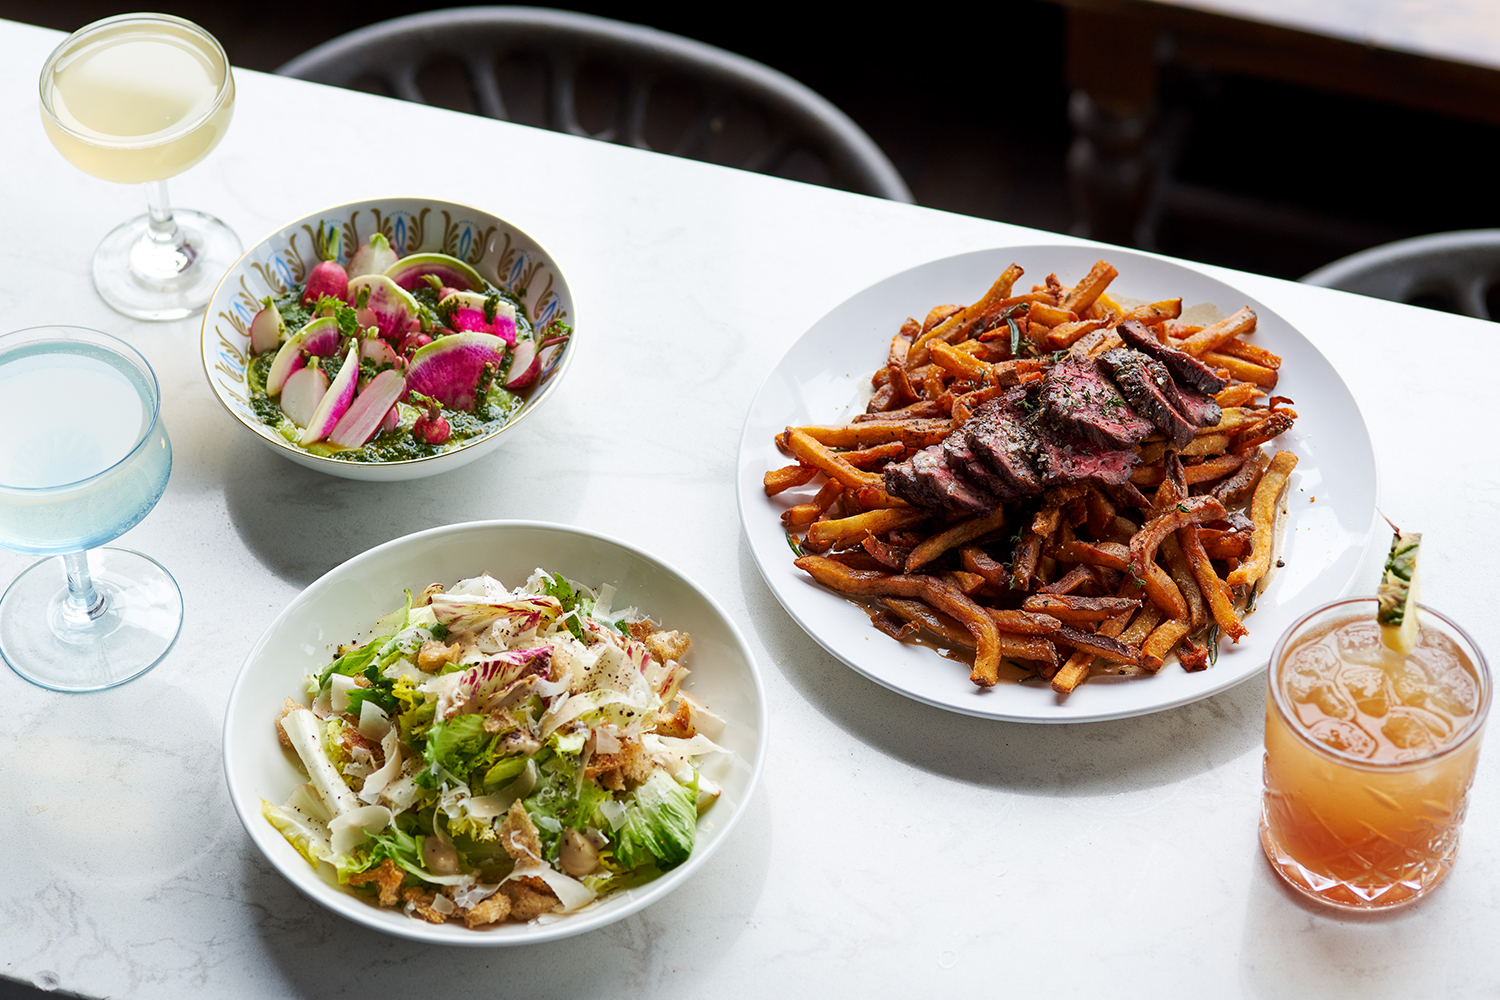 the food offerings at Chicago's Scofflaw